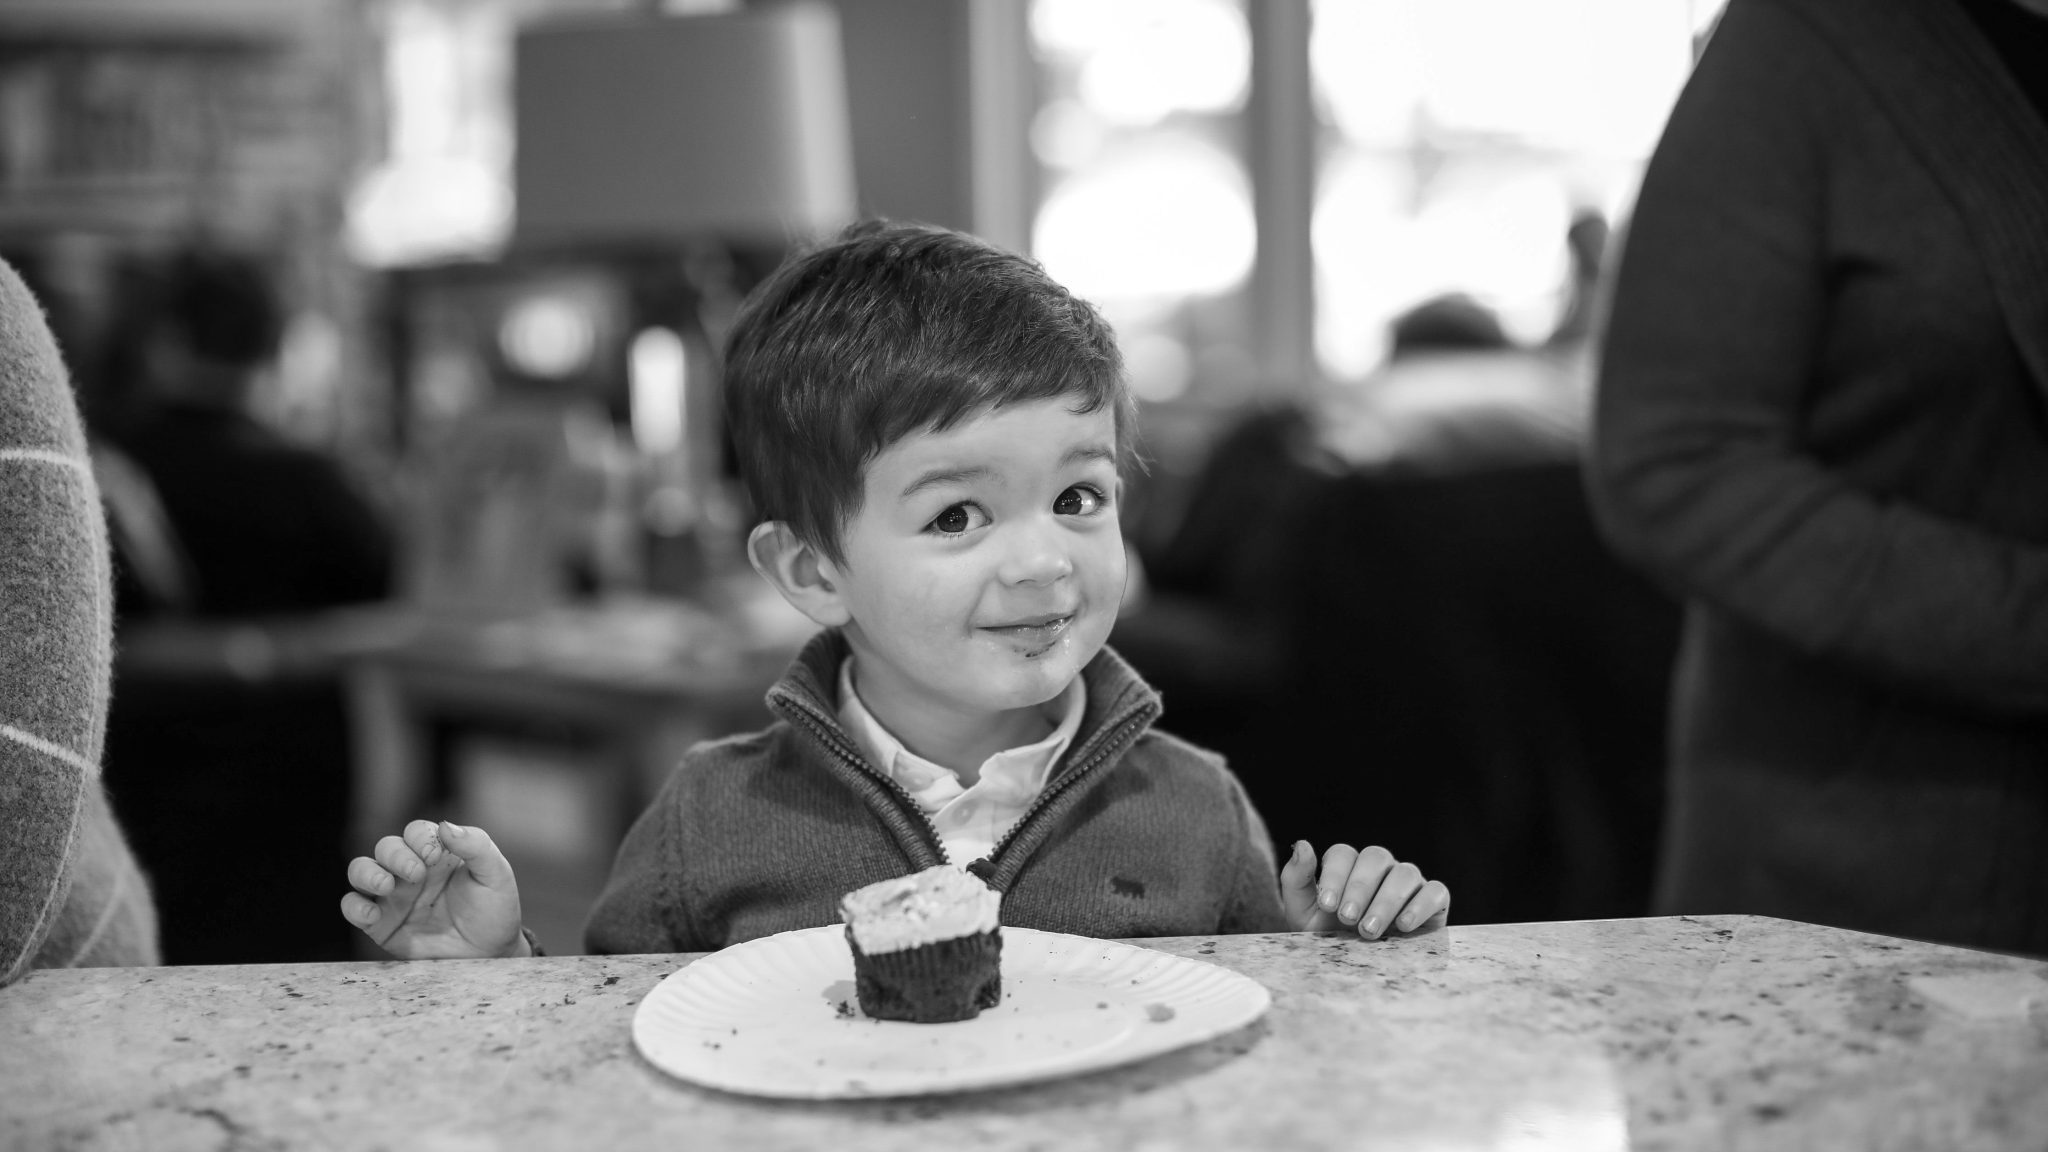 a little boy sitting at a table with a cupcake in front of him